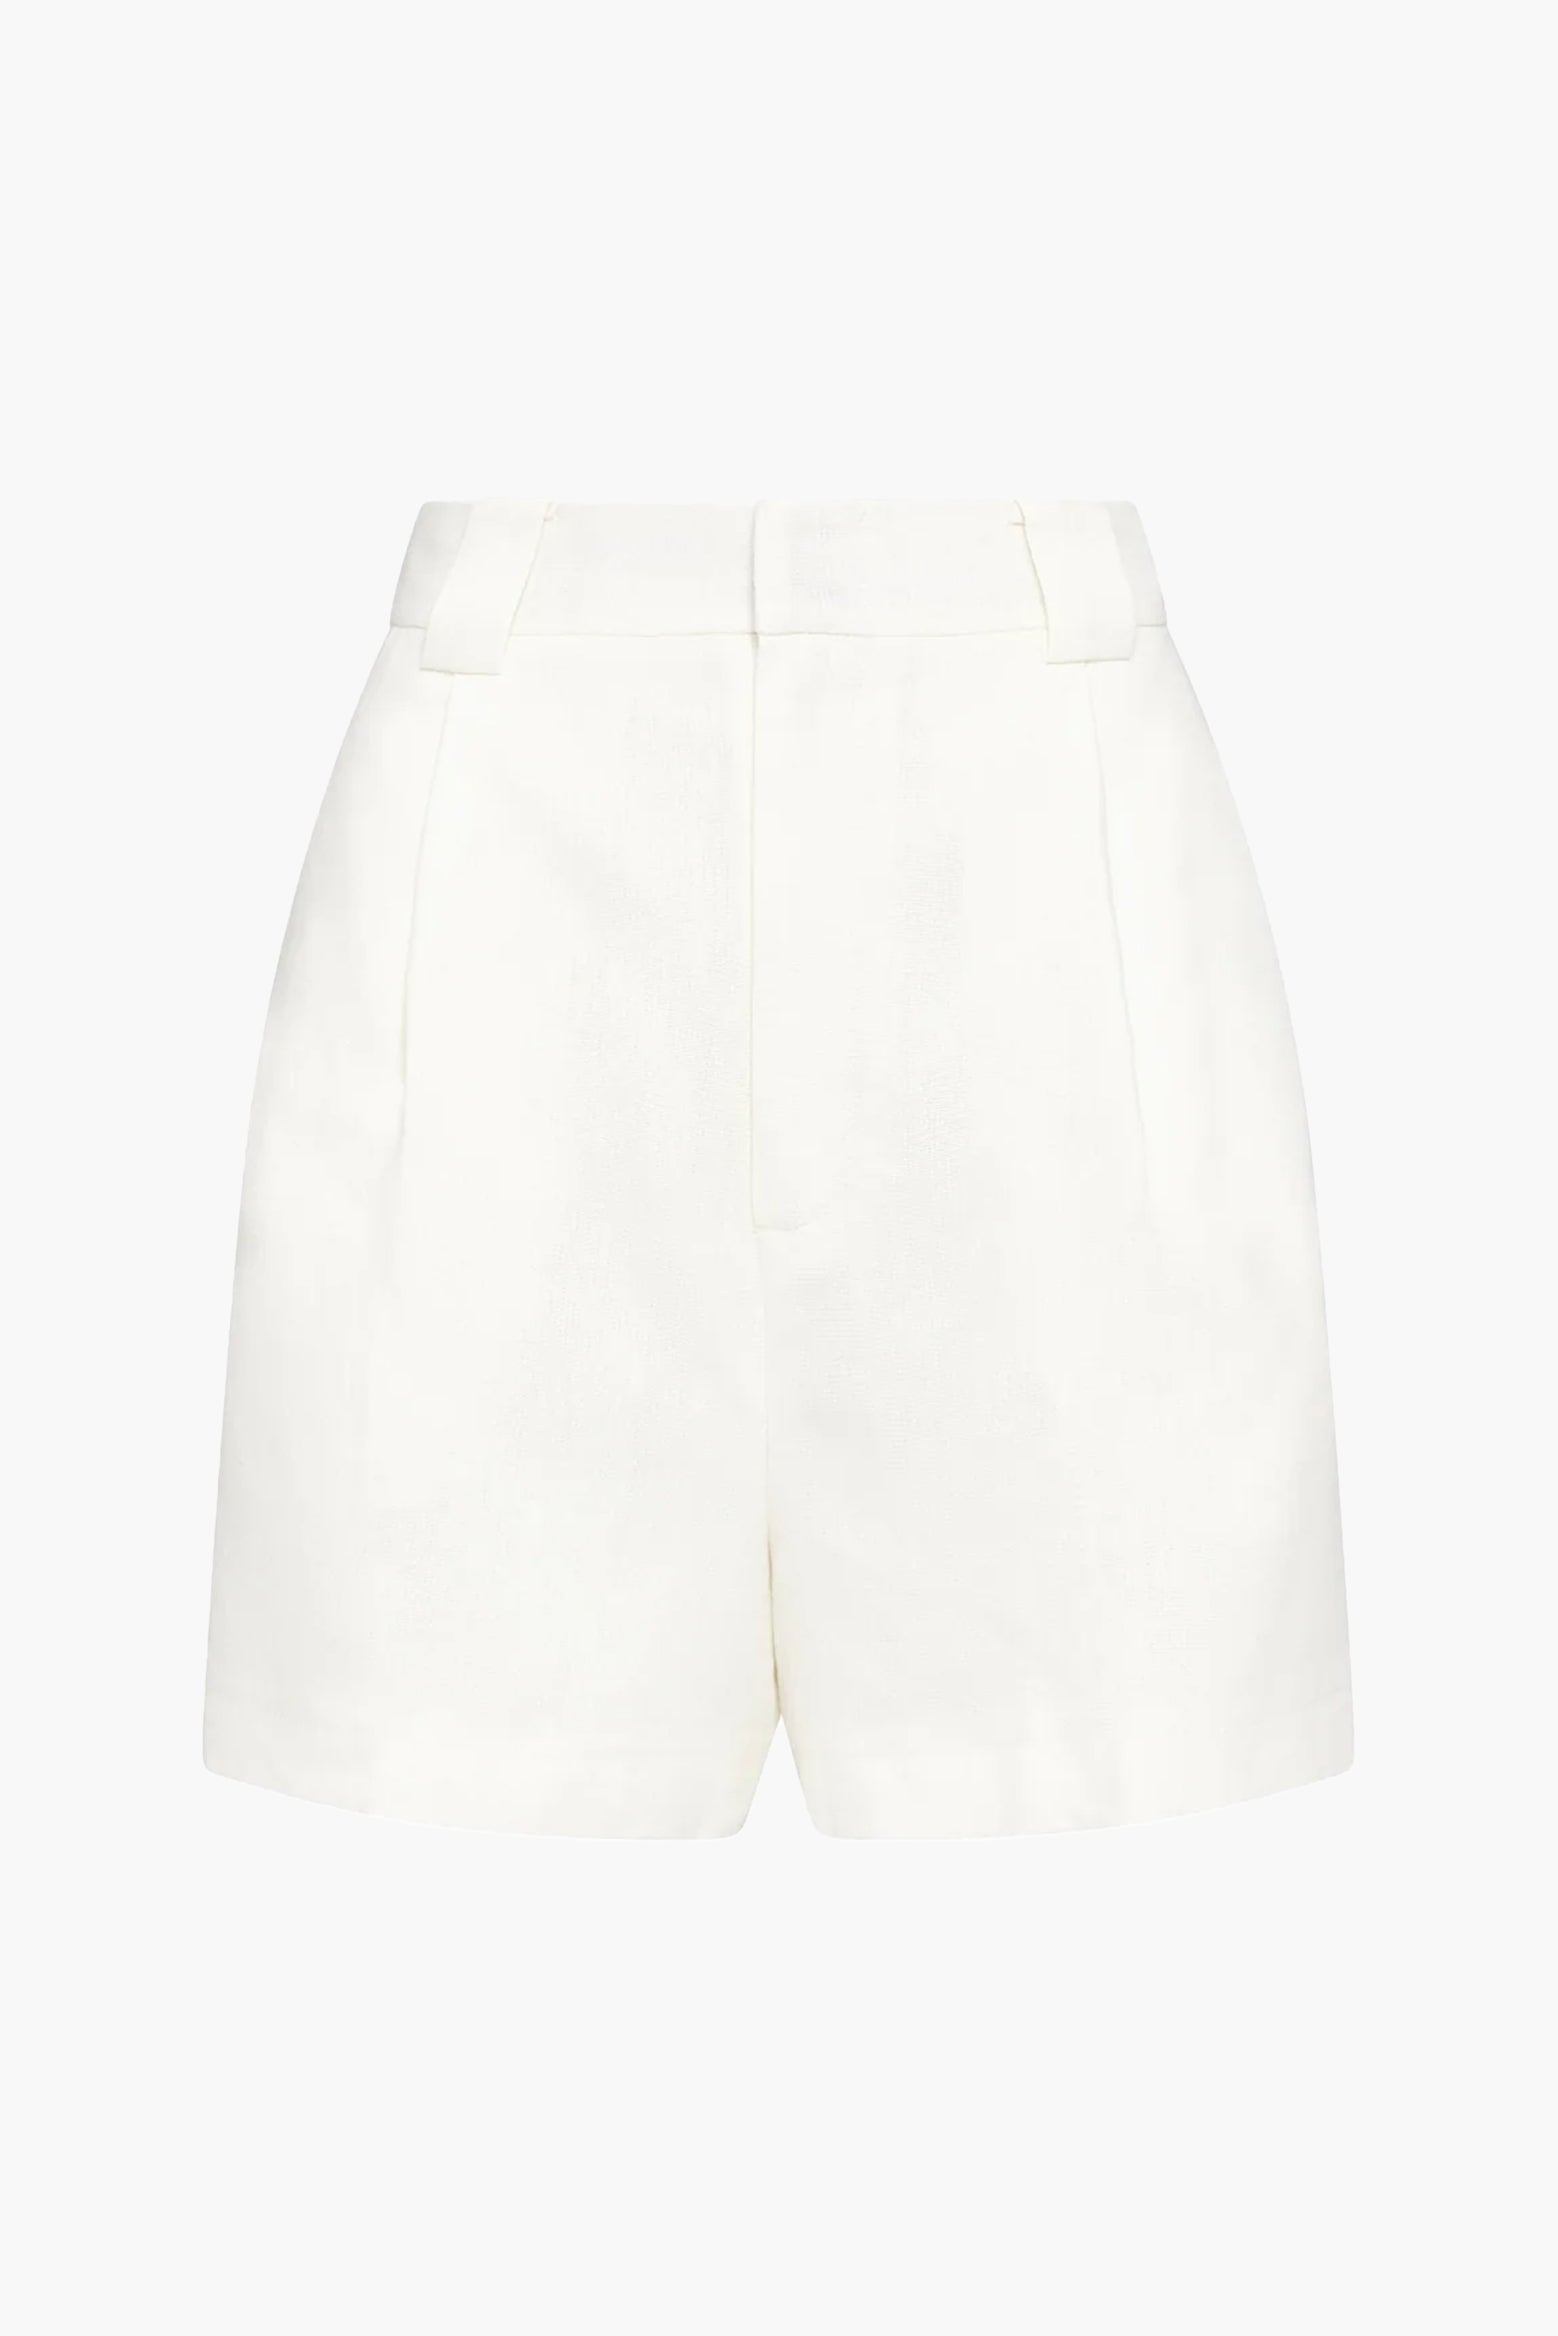 SIR. Clemence Tailored Short in Ivory available at The New Trend Australia.